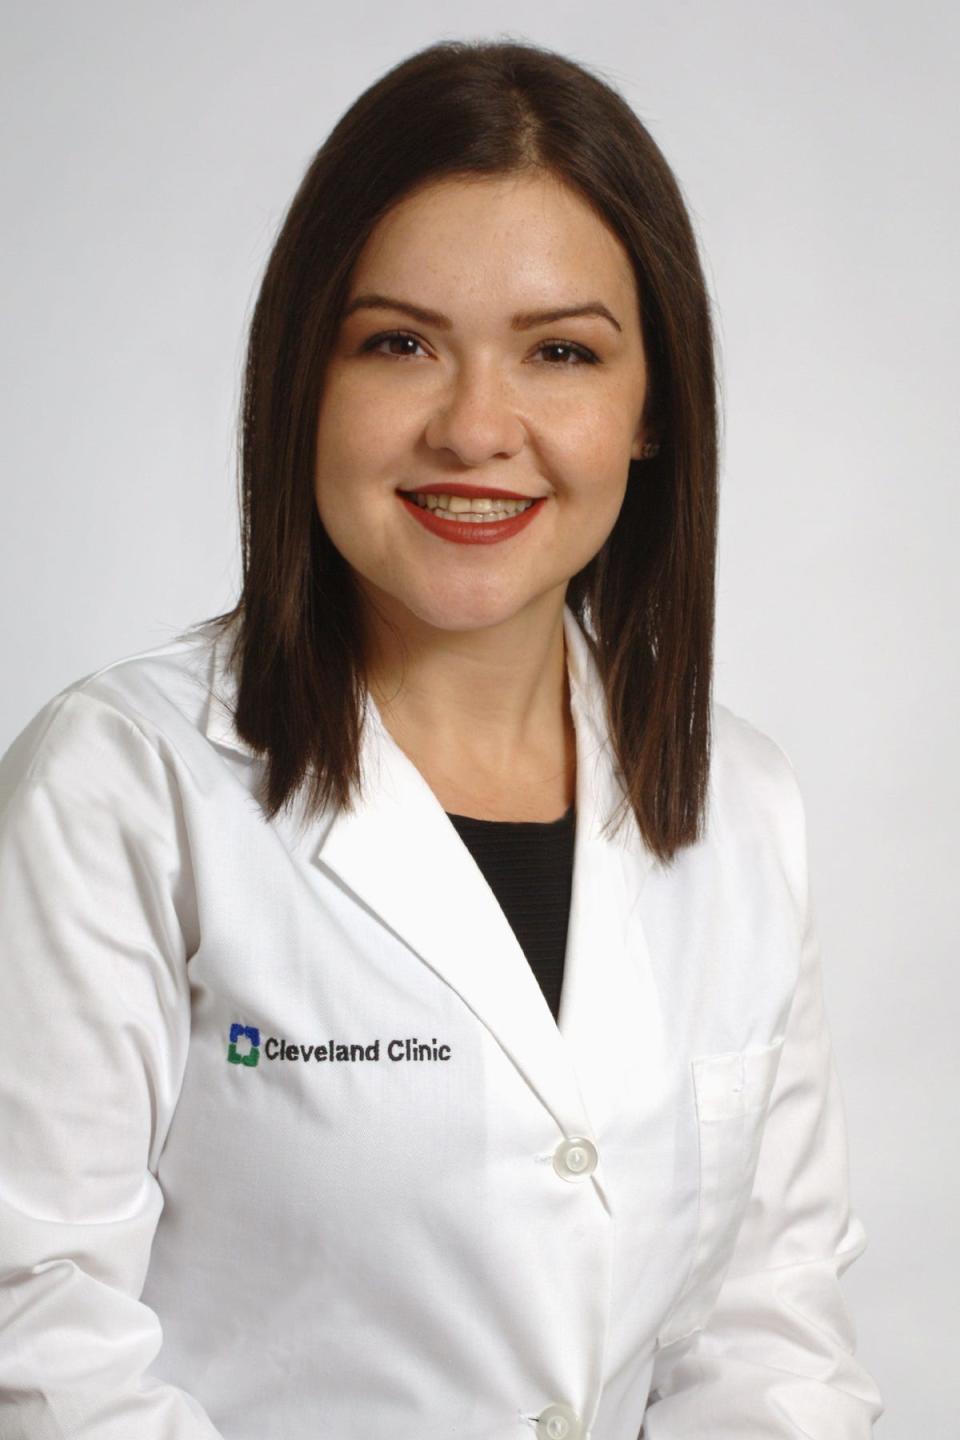 Dr. Buse Sengul is a neurologist and MS expert with Cleveland Clinic Weston.